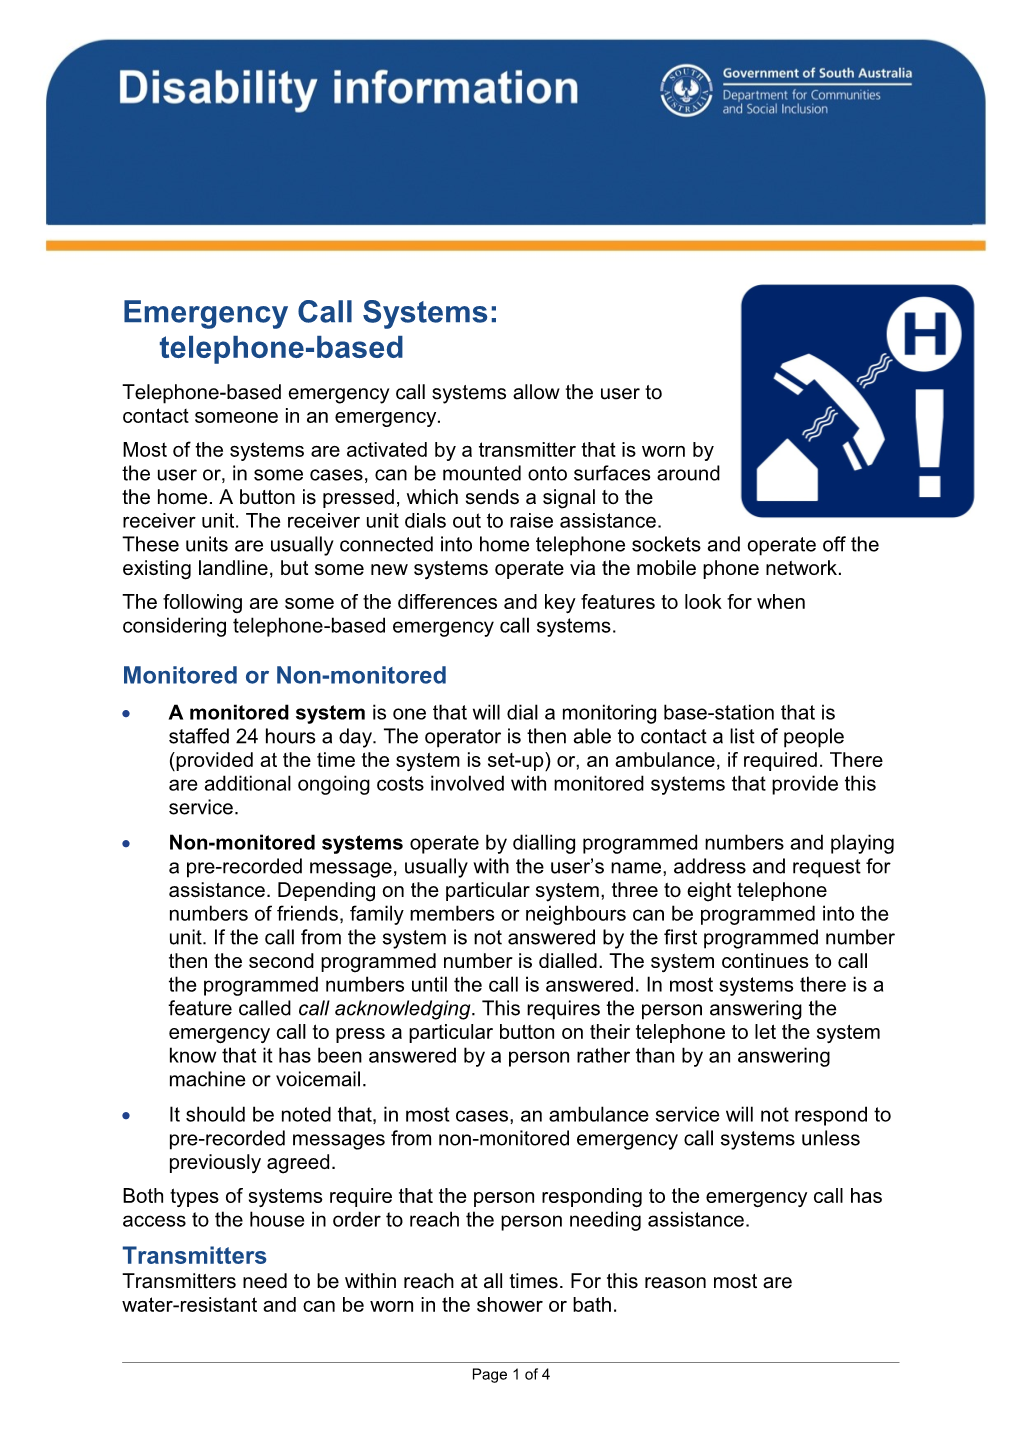 Emergency Call Systems: Telephone-Based